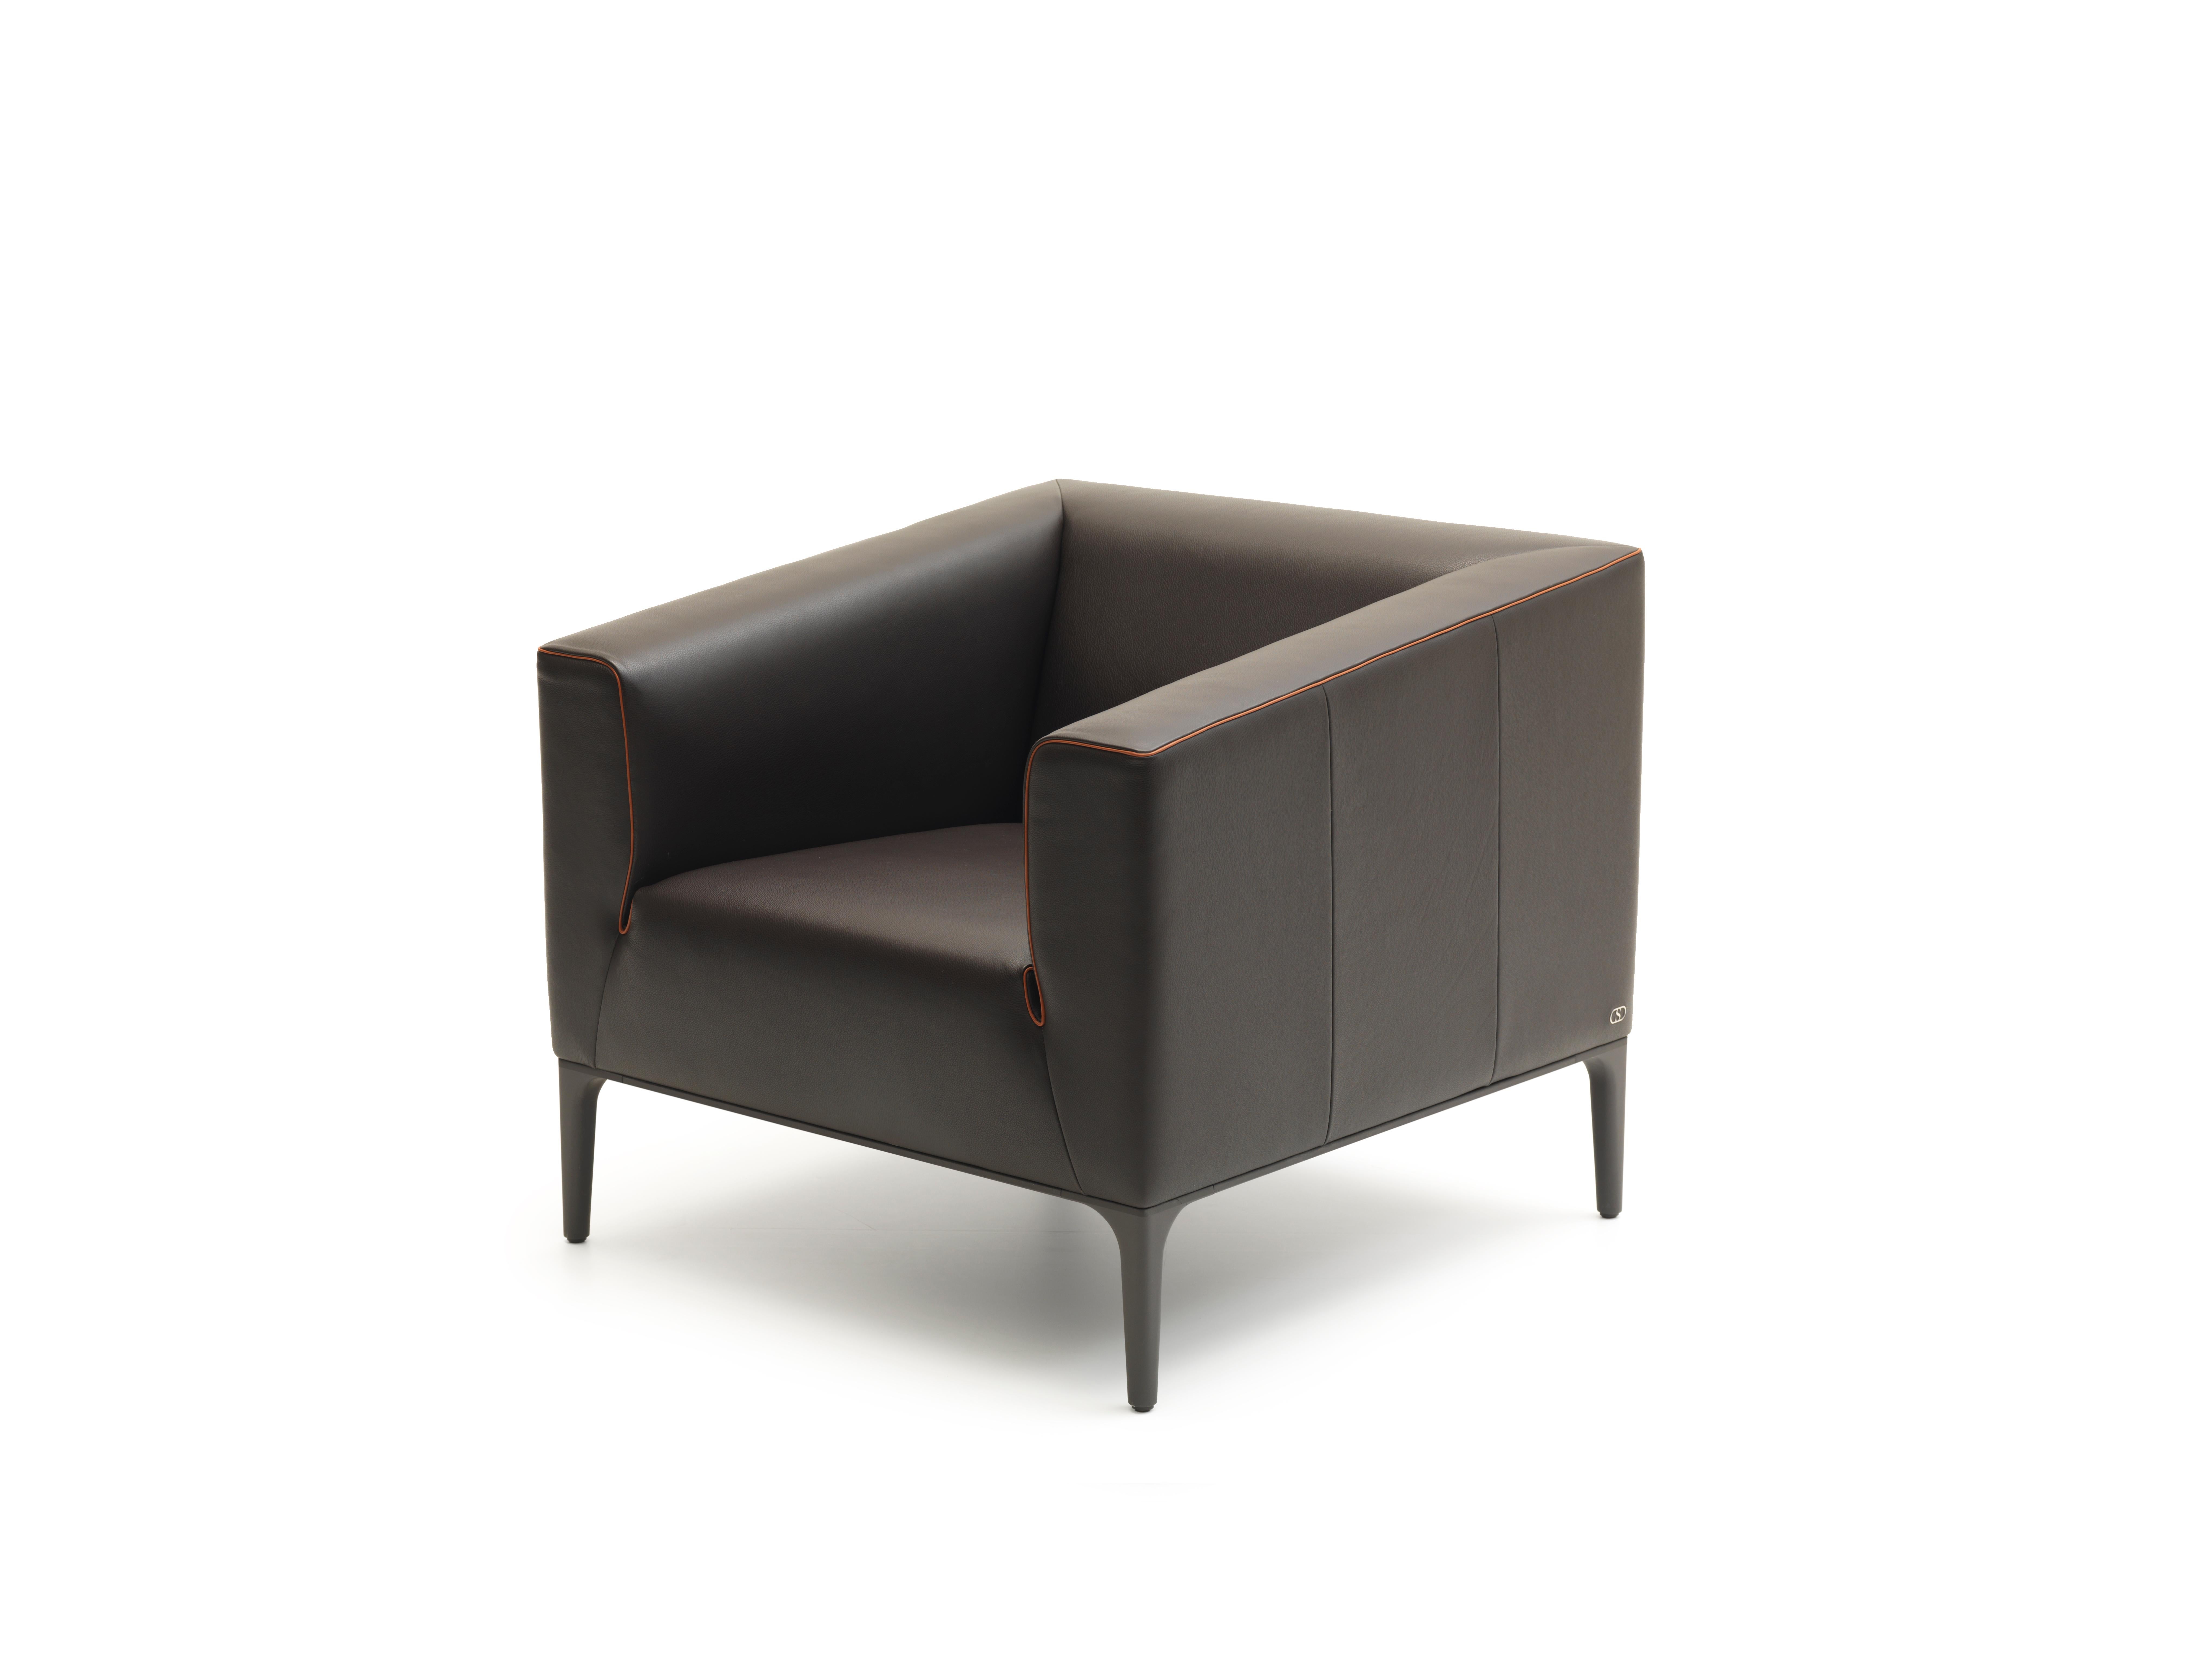 DS-161 armchair by De Sede
Dimensions: D 54 x W 79 x H 72 cm
Materials: aluminium, leather

Prices may change according to the chosen materials and size. 

A linear outer contour and round interior – the elegant piping of the contour focuses